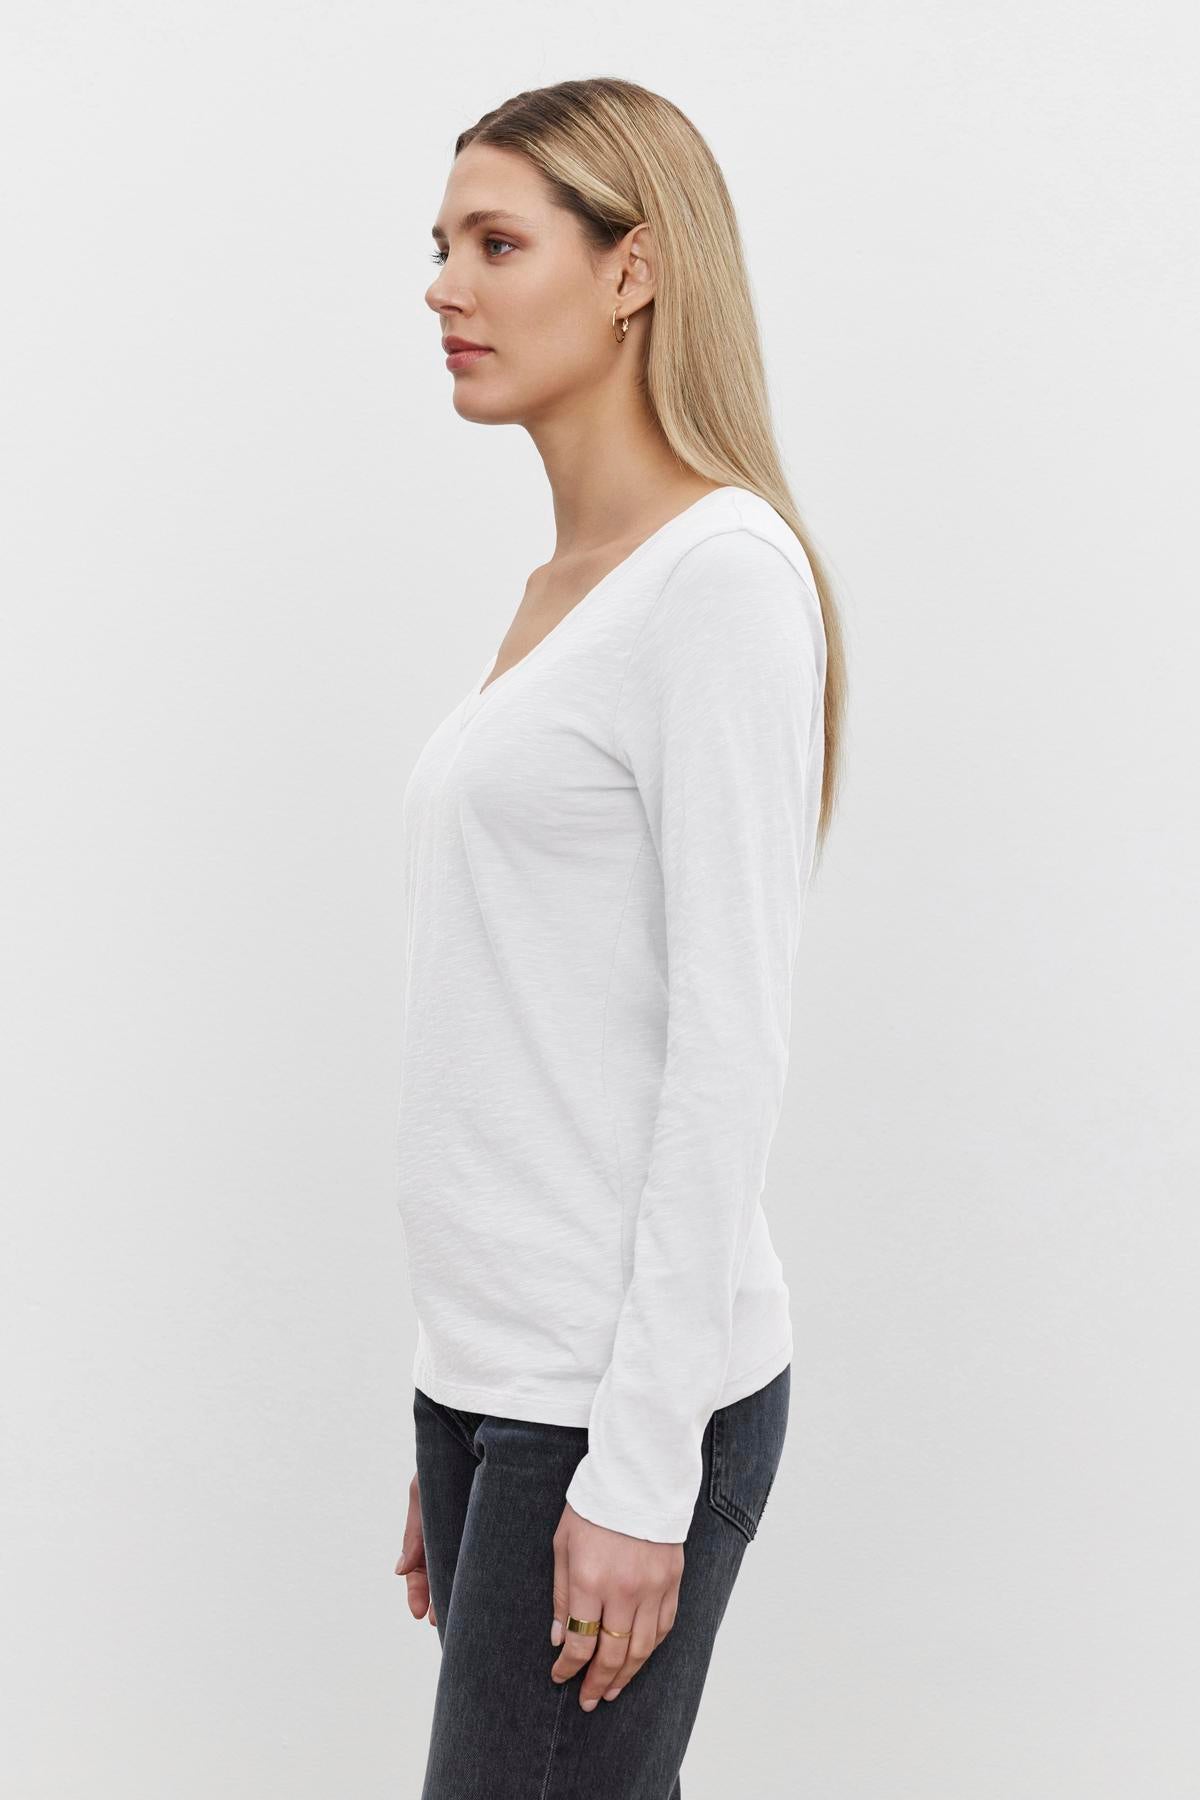 A person with long blonde hair stands in profile, wearing a white textured BLAIRE TEE by Velvet by Graham & Spencer with a v-neckline and dark jeans against a plain white background.-37377300103361